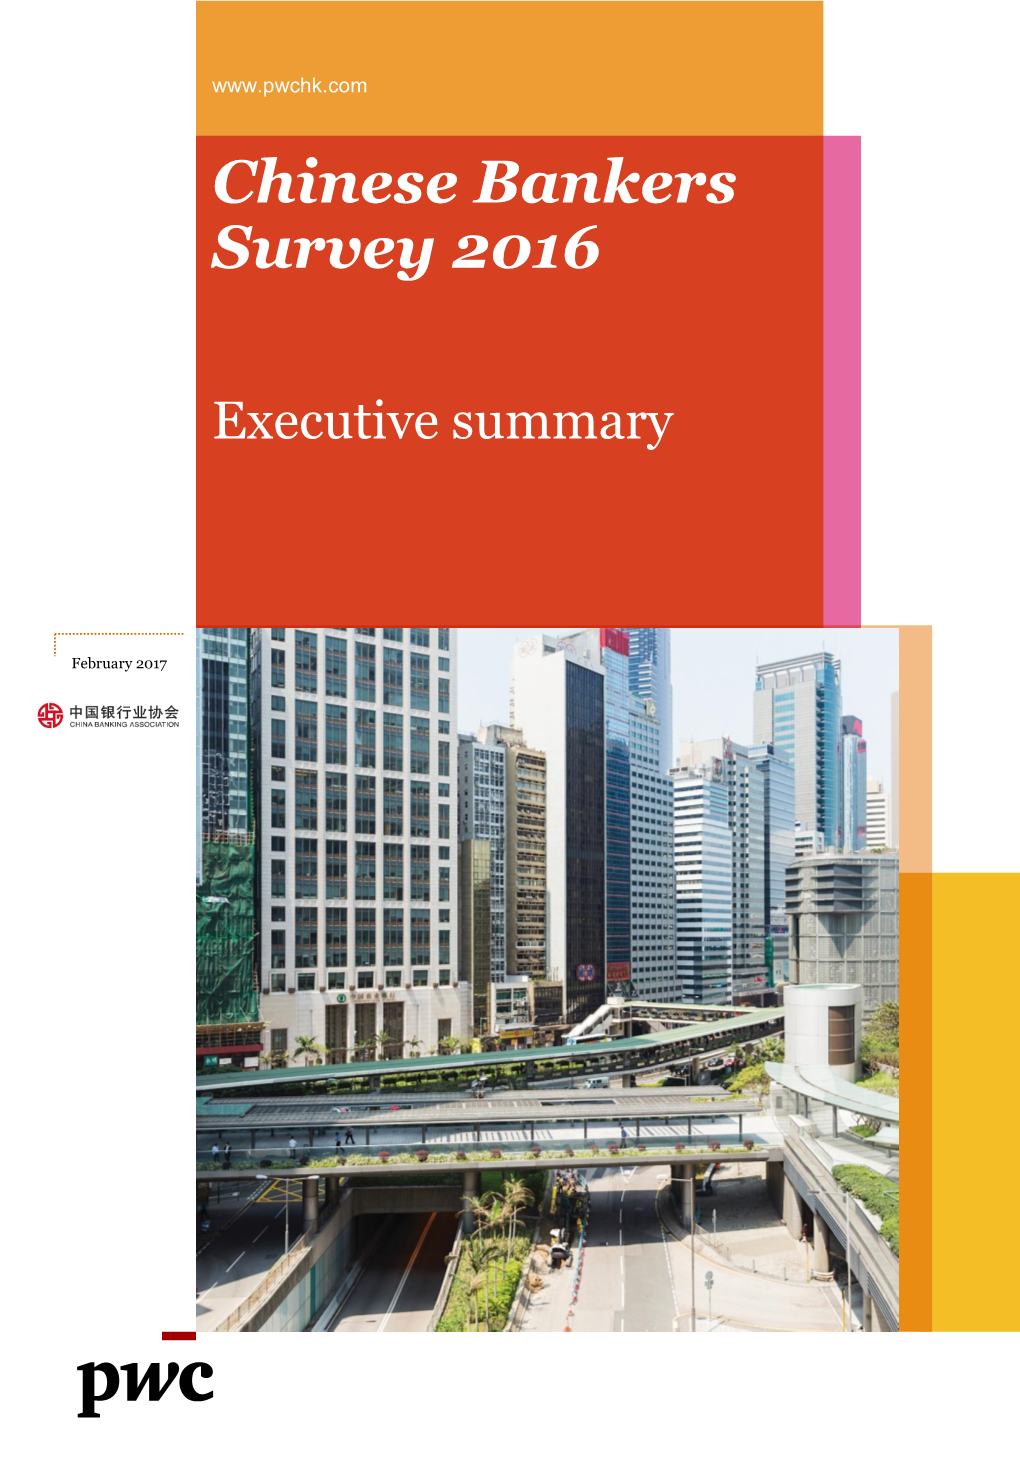 Chinese Bankers Survey 2016